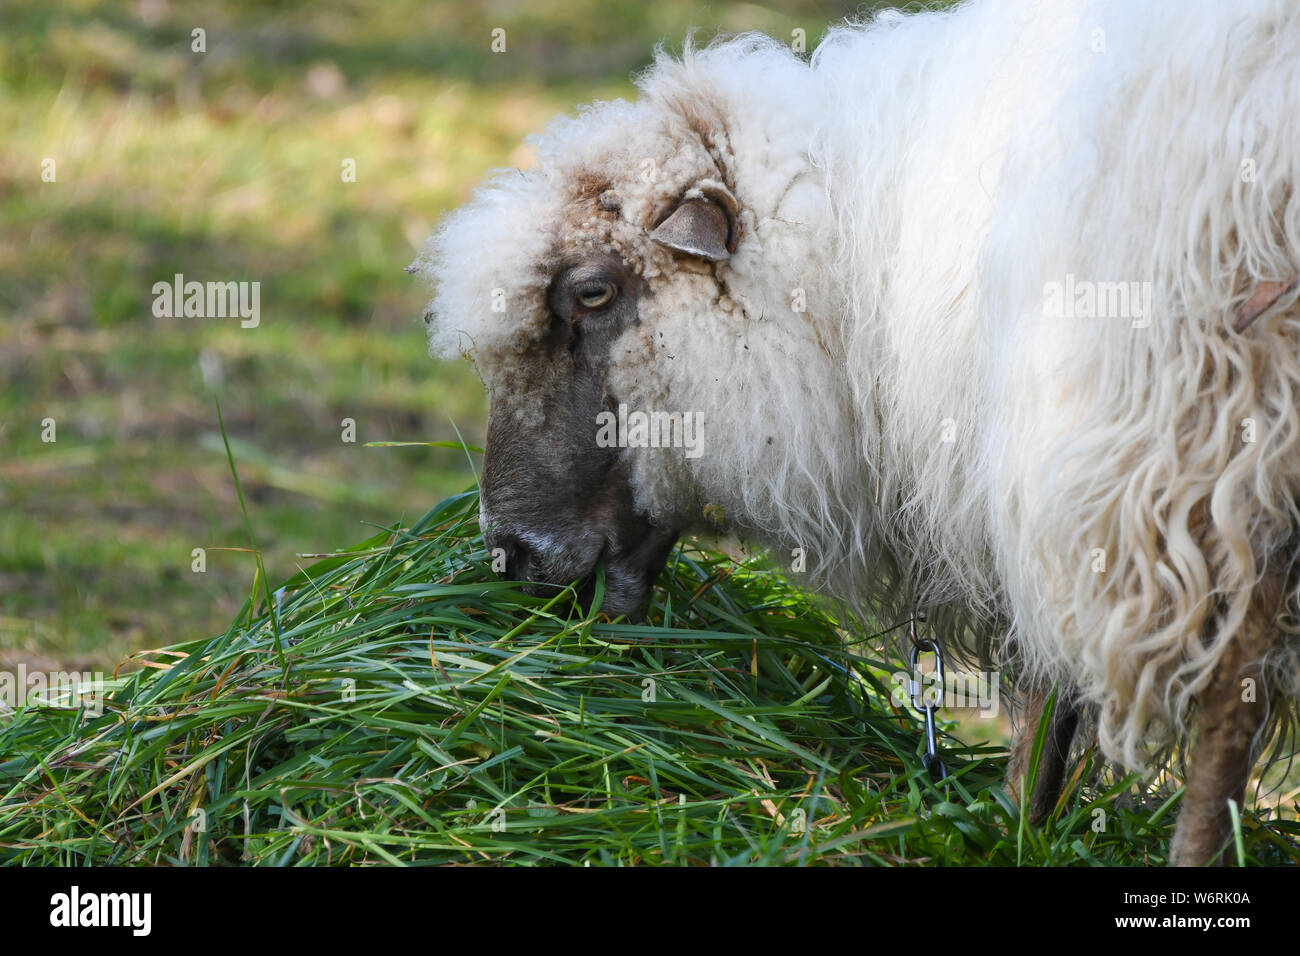 Close-up of a sheep eating grass Stock Photo